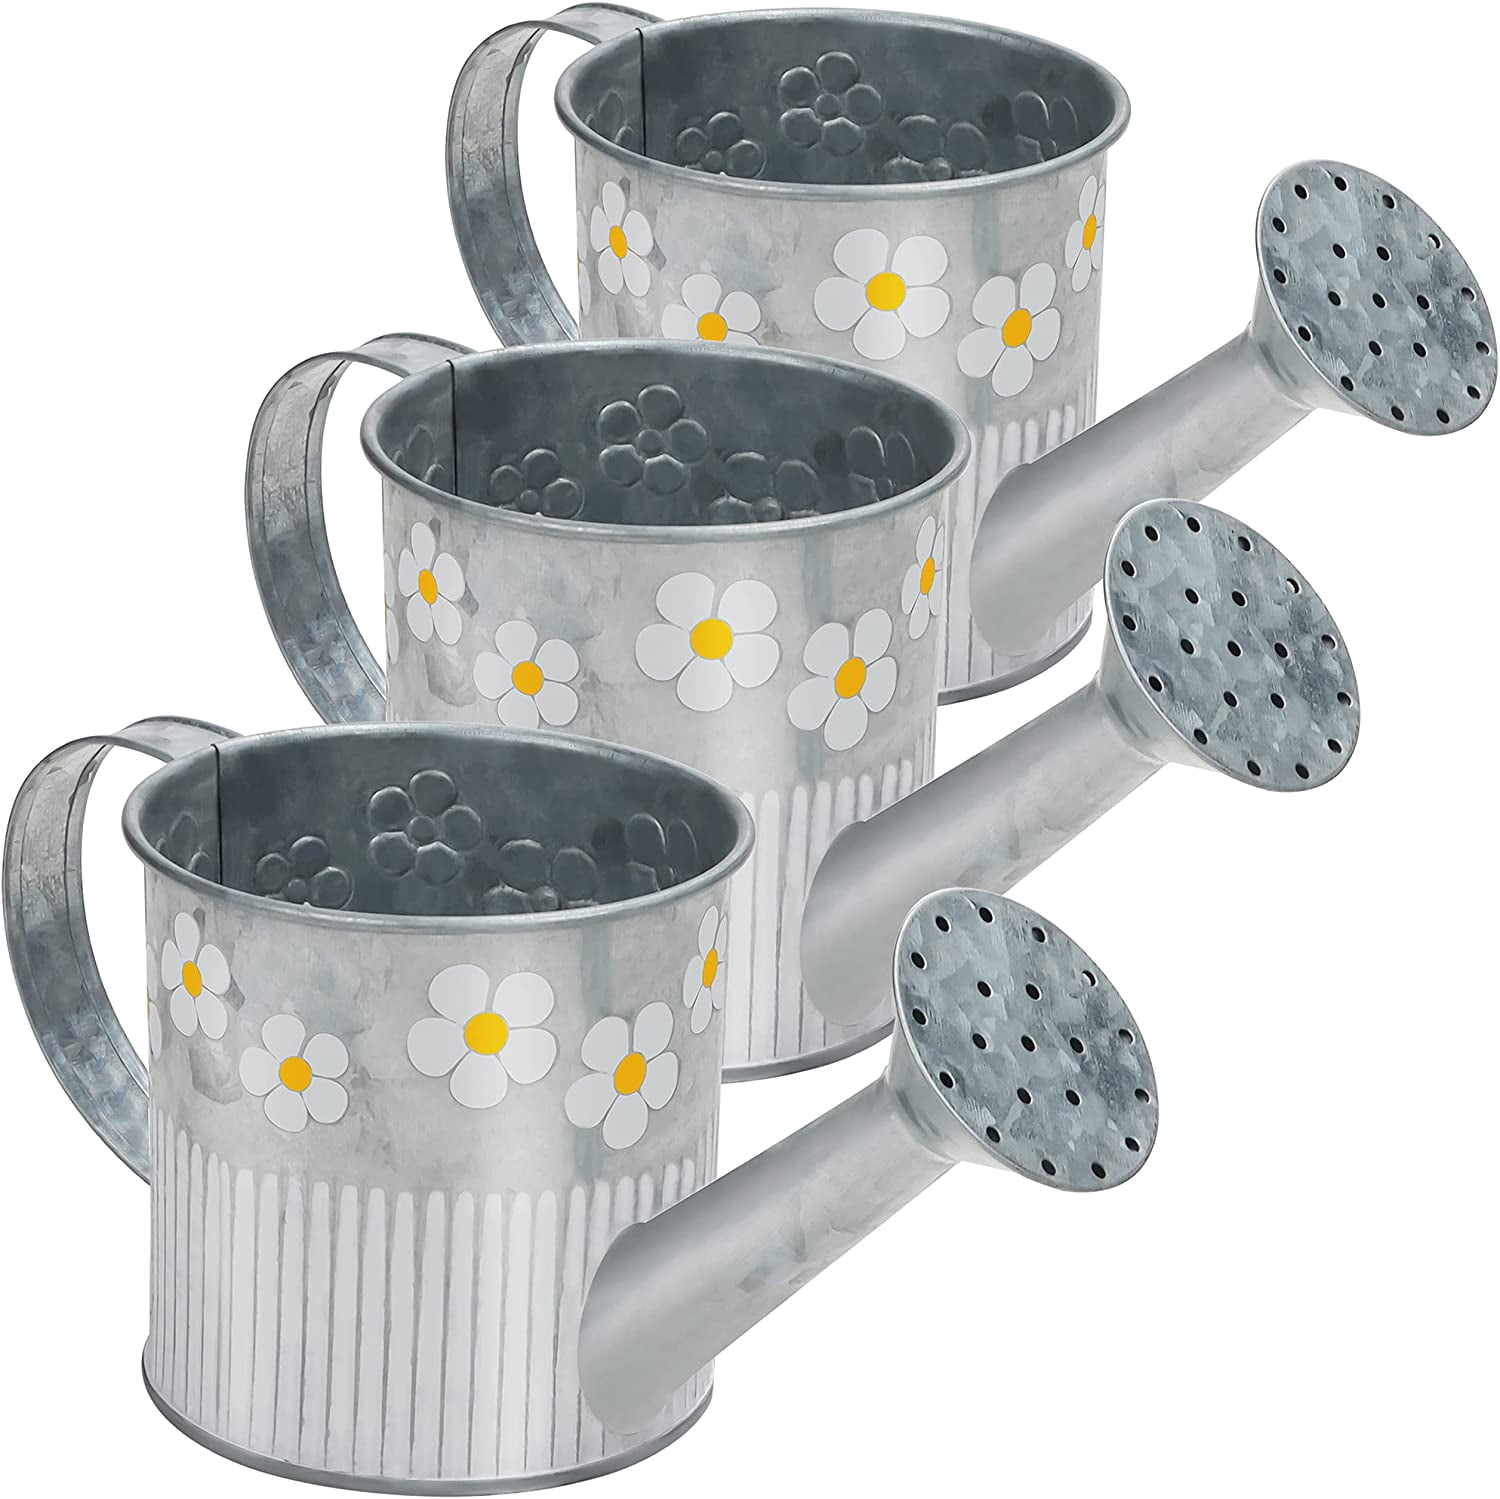 Decorative Silver Metal Watering Can (Set Of 3) - 550Ml Vintage